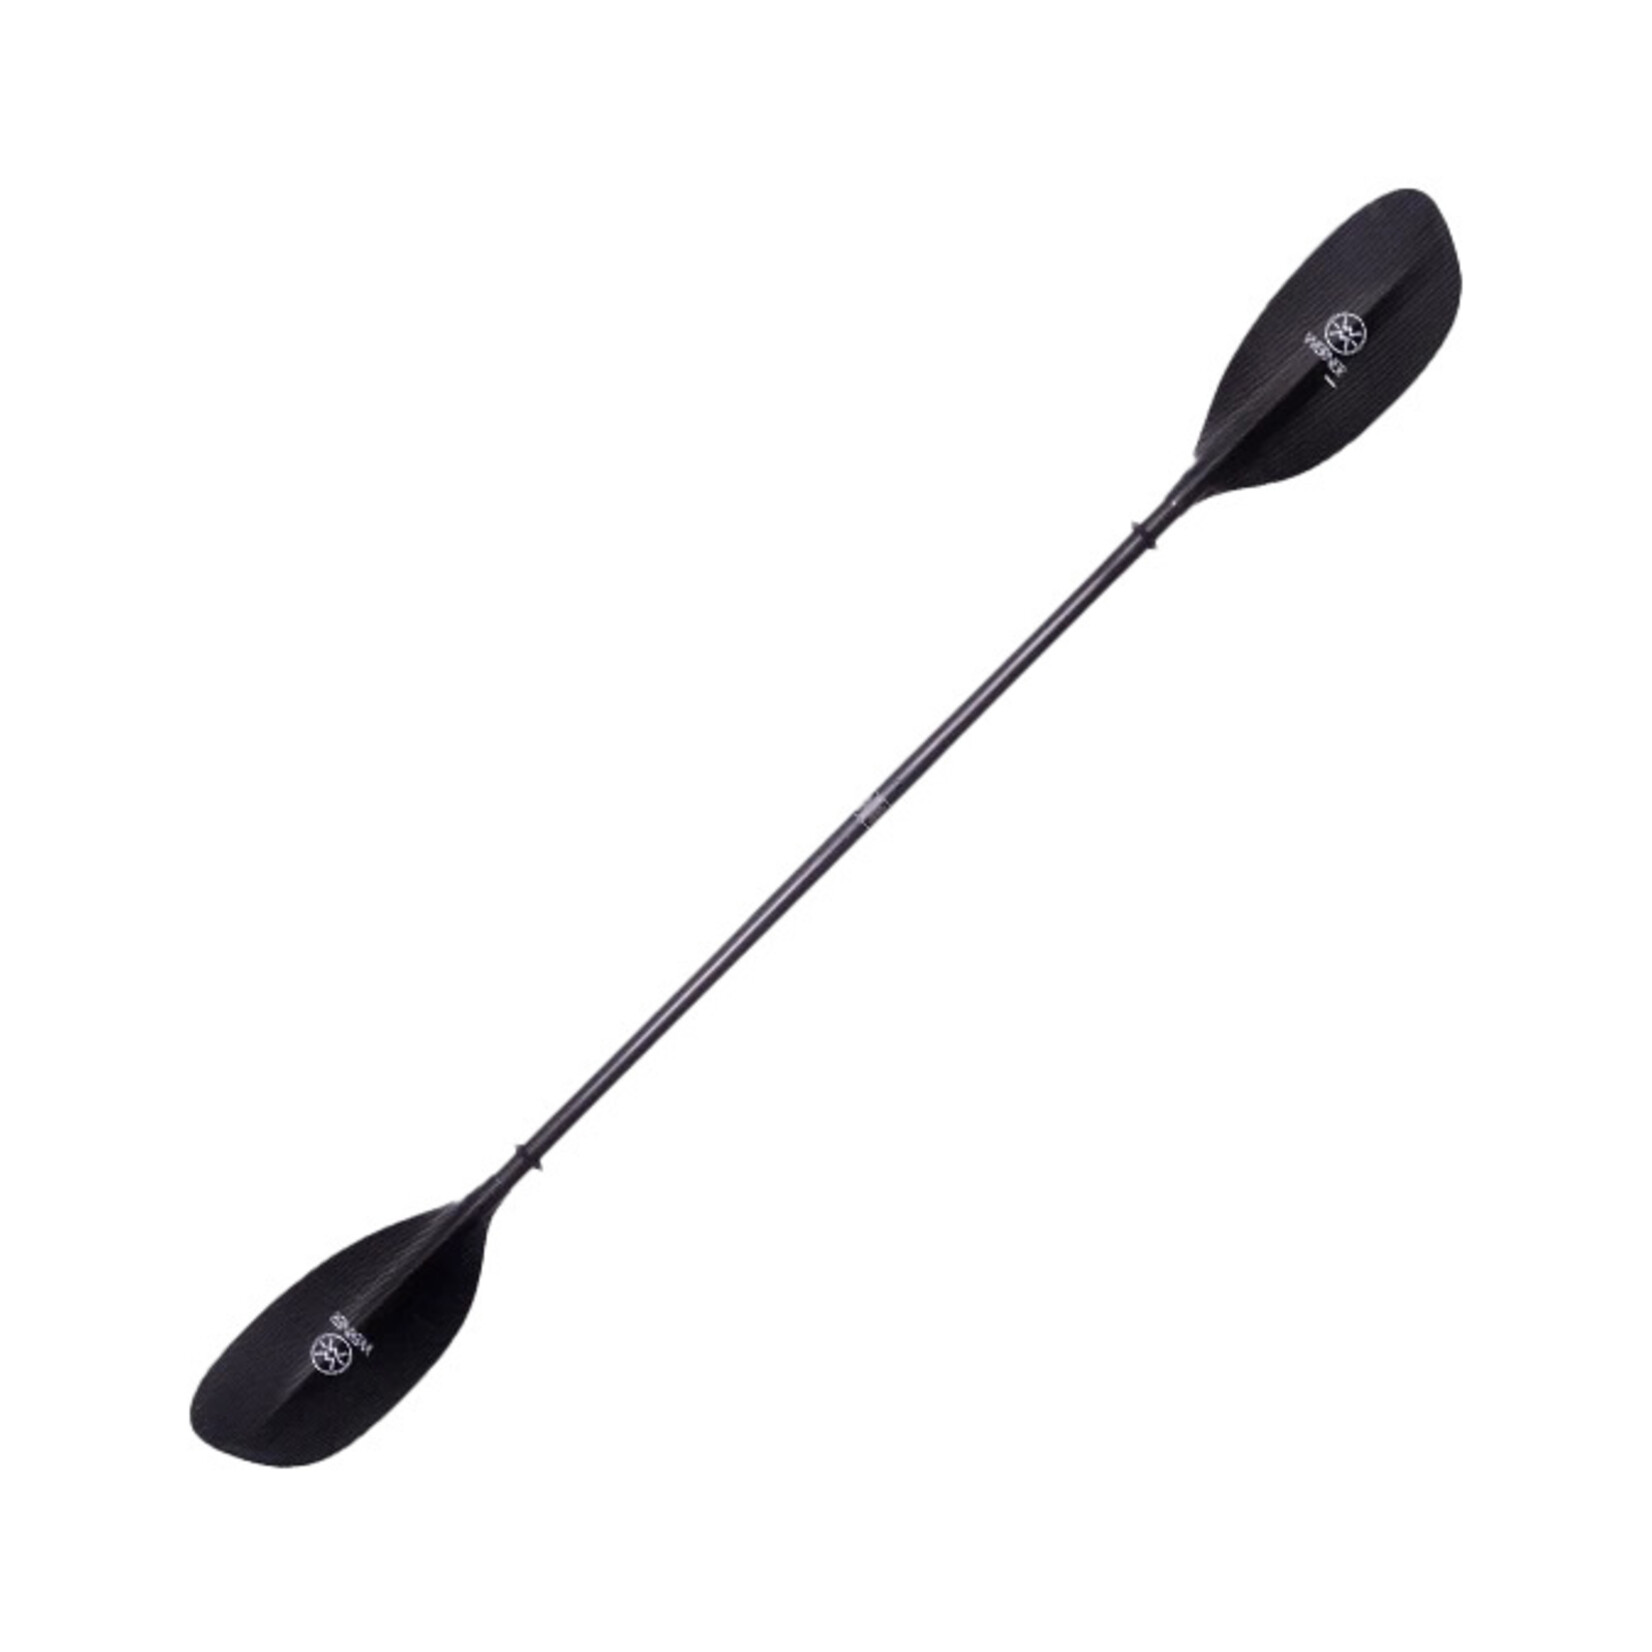 Werner Paddles - Ikelos Carbon 2 Piece Straight Shaft Paddle